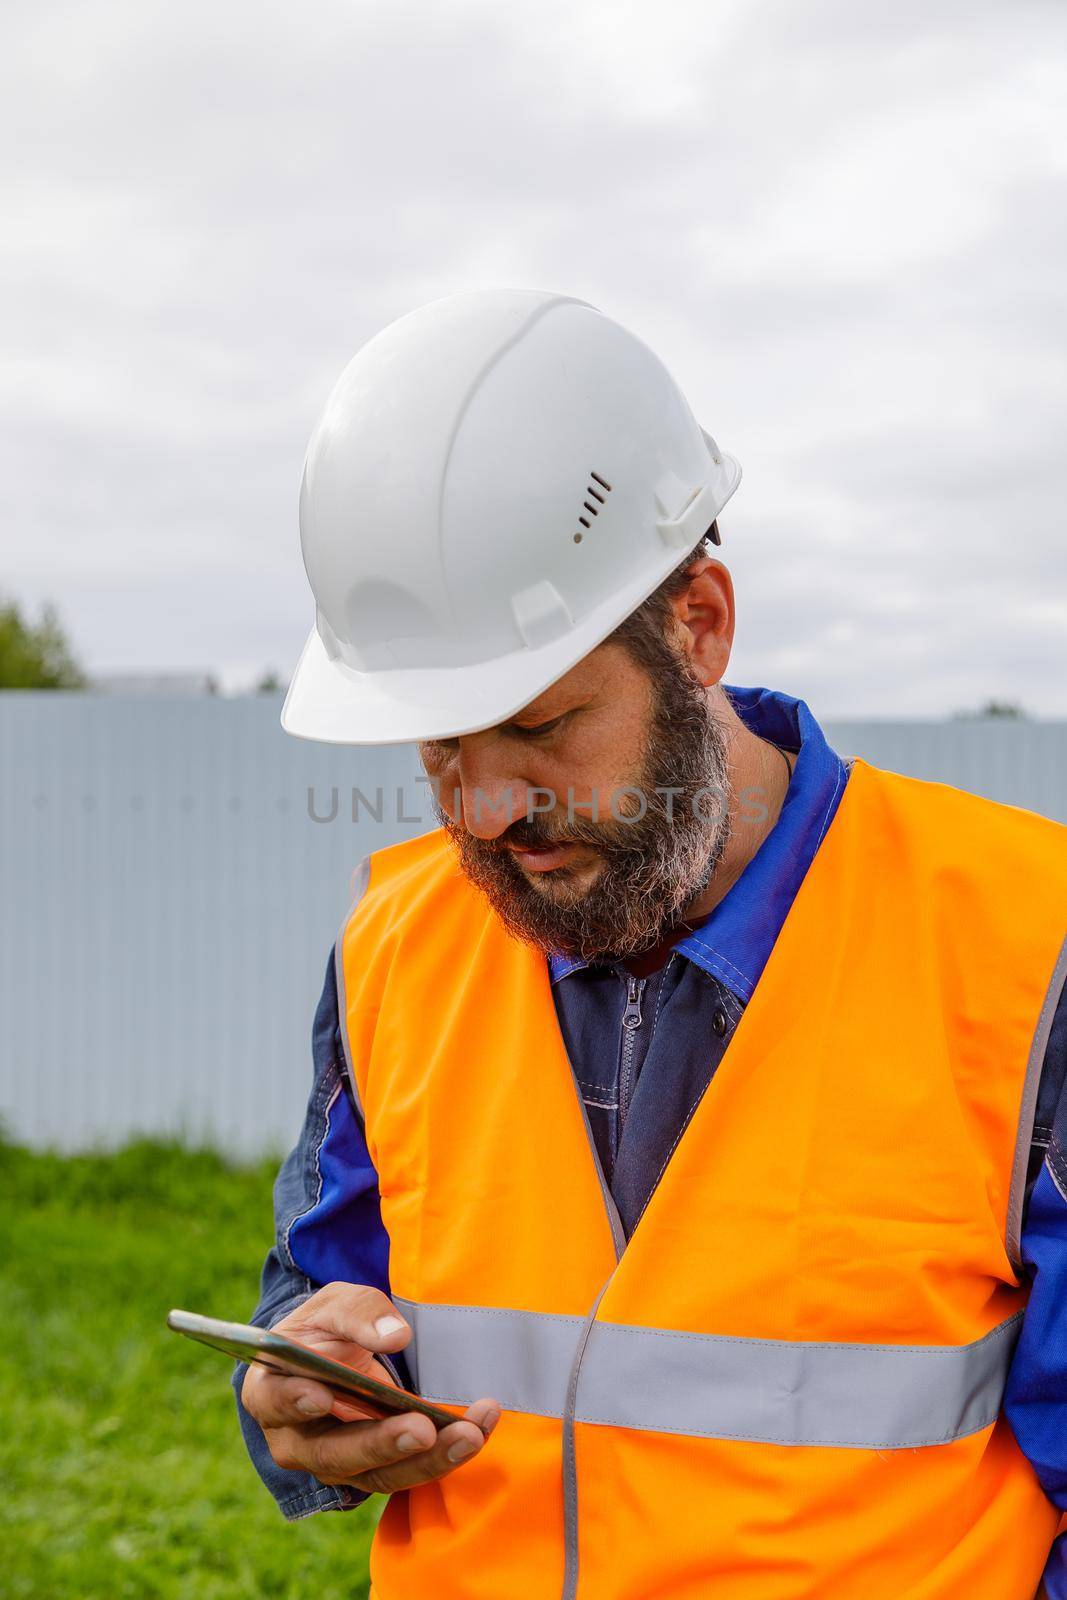 A civil engineer looks at a mobile phone. A bearded man is looking for information on his mobile phone.